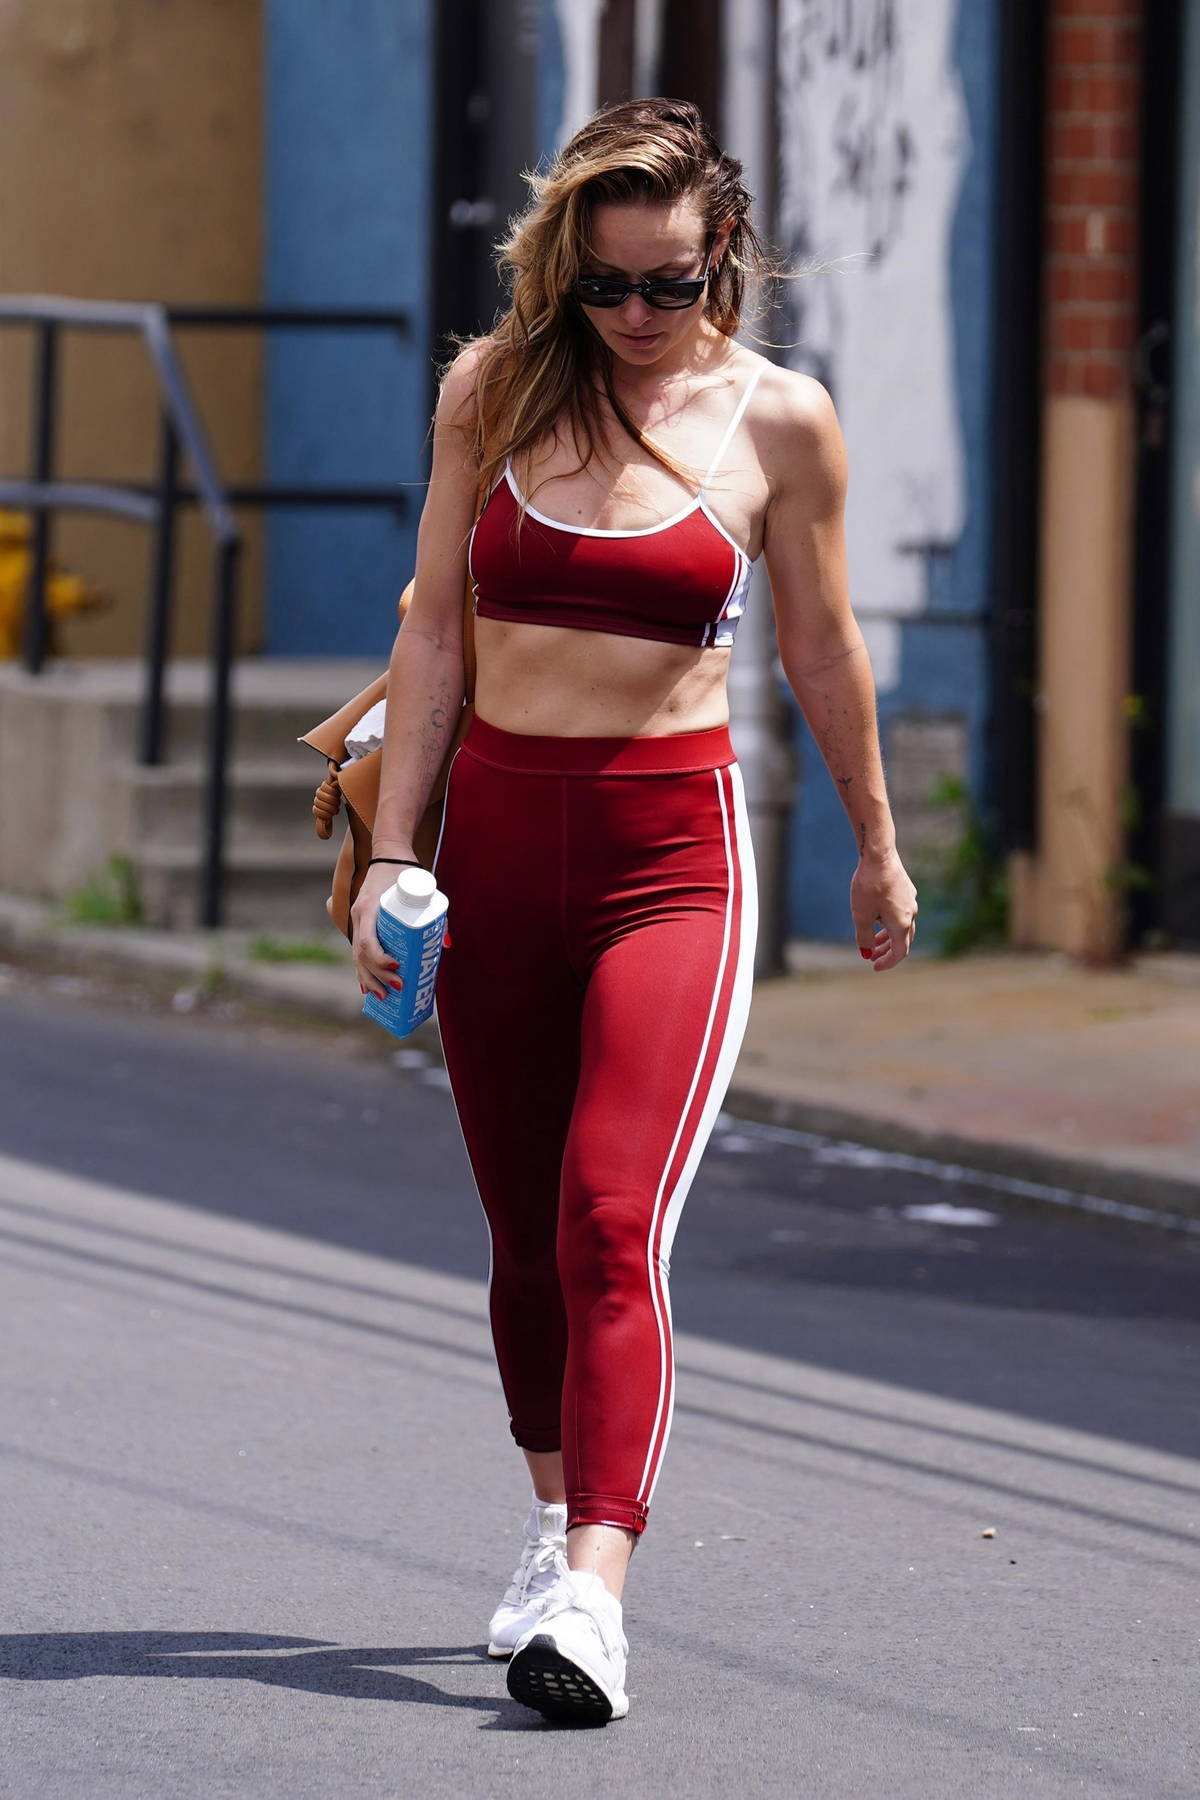 https://www.celebsfirst.com/wp-content/uploads/2023/04/Olivia-Wilde-looks-incredible-in-a-red-sports-bra-with-matching-leggings-while-leaving-the-gym-in-Studio-City-California-180423_15.jpg